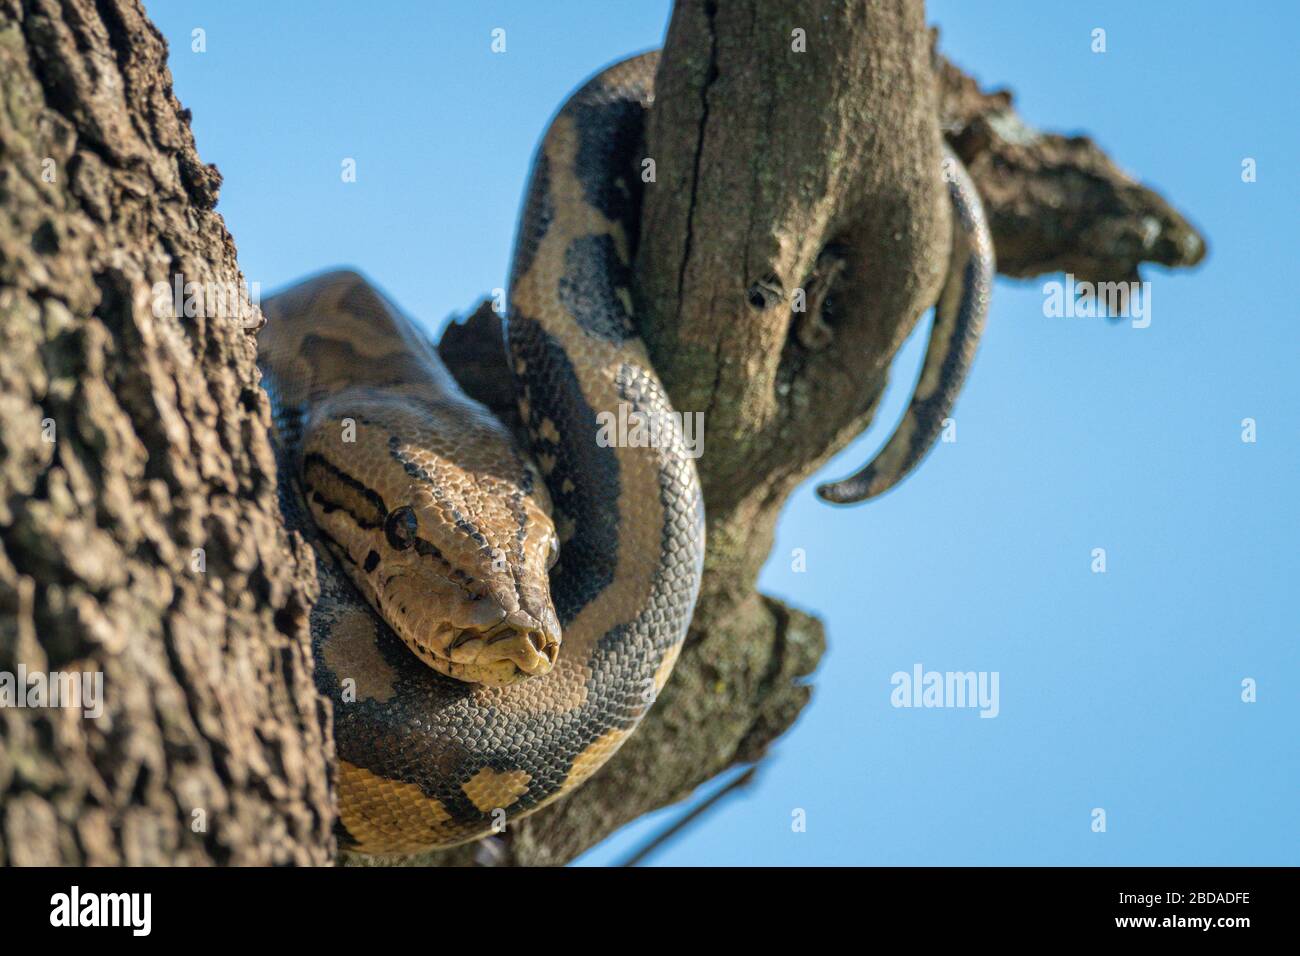 Rock python wrapped around trunk and branch Stock Photo